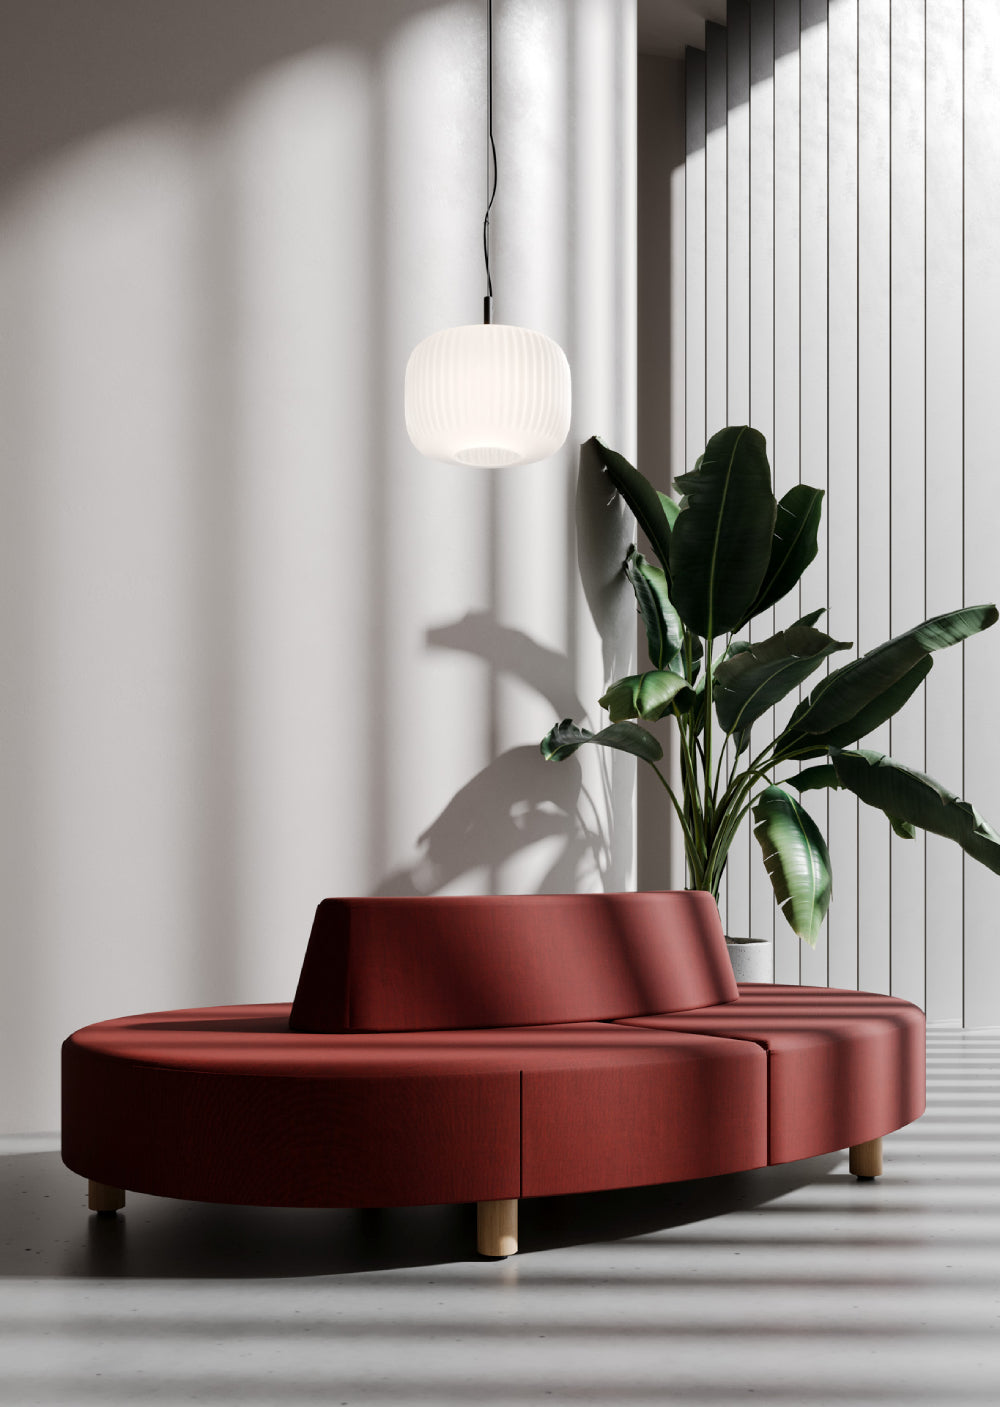 Nubi Upholstered Modular Sofa with Indoor Plant and Ceiling Light in Reception Setting 4